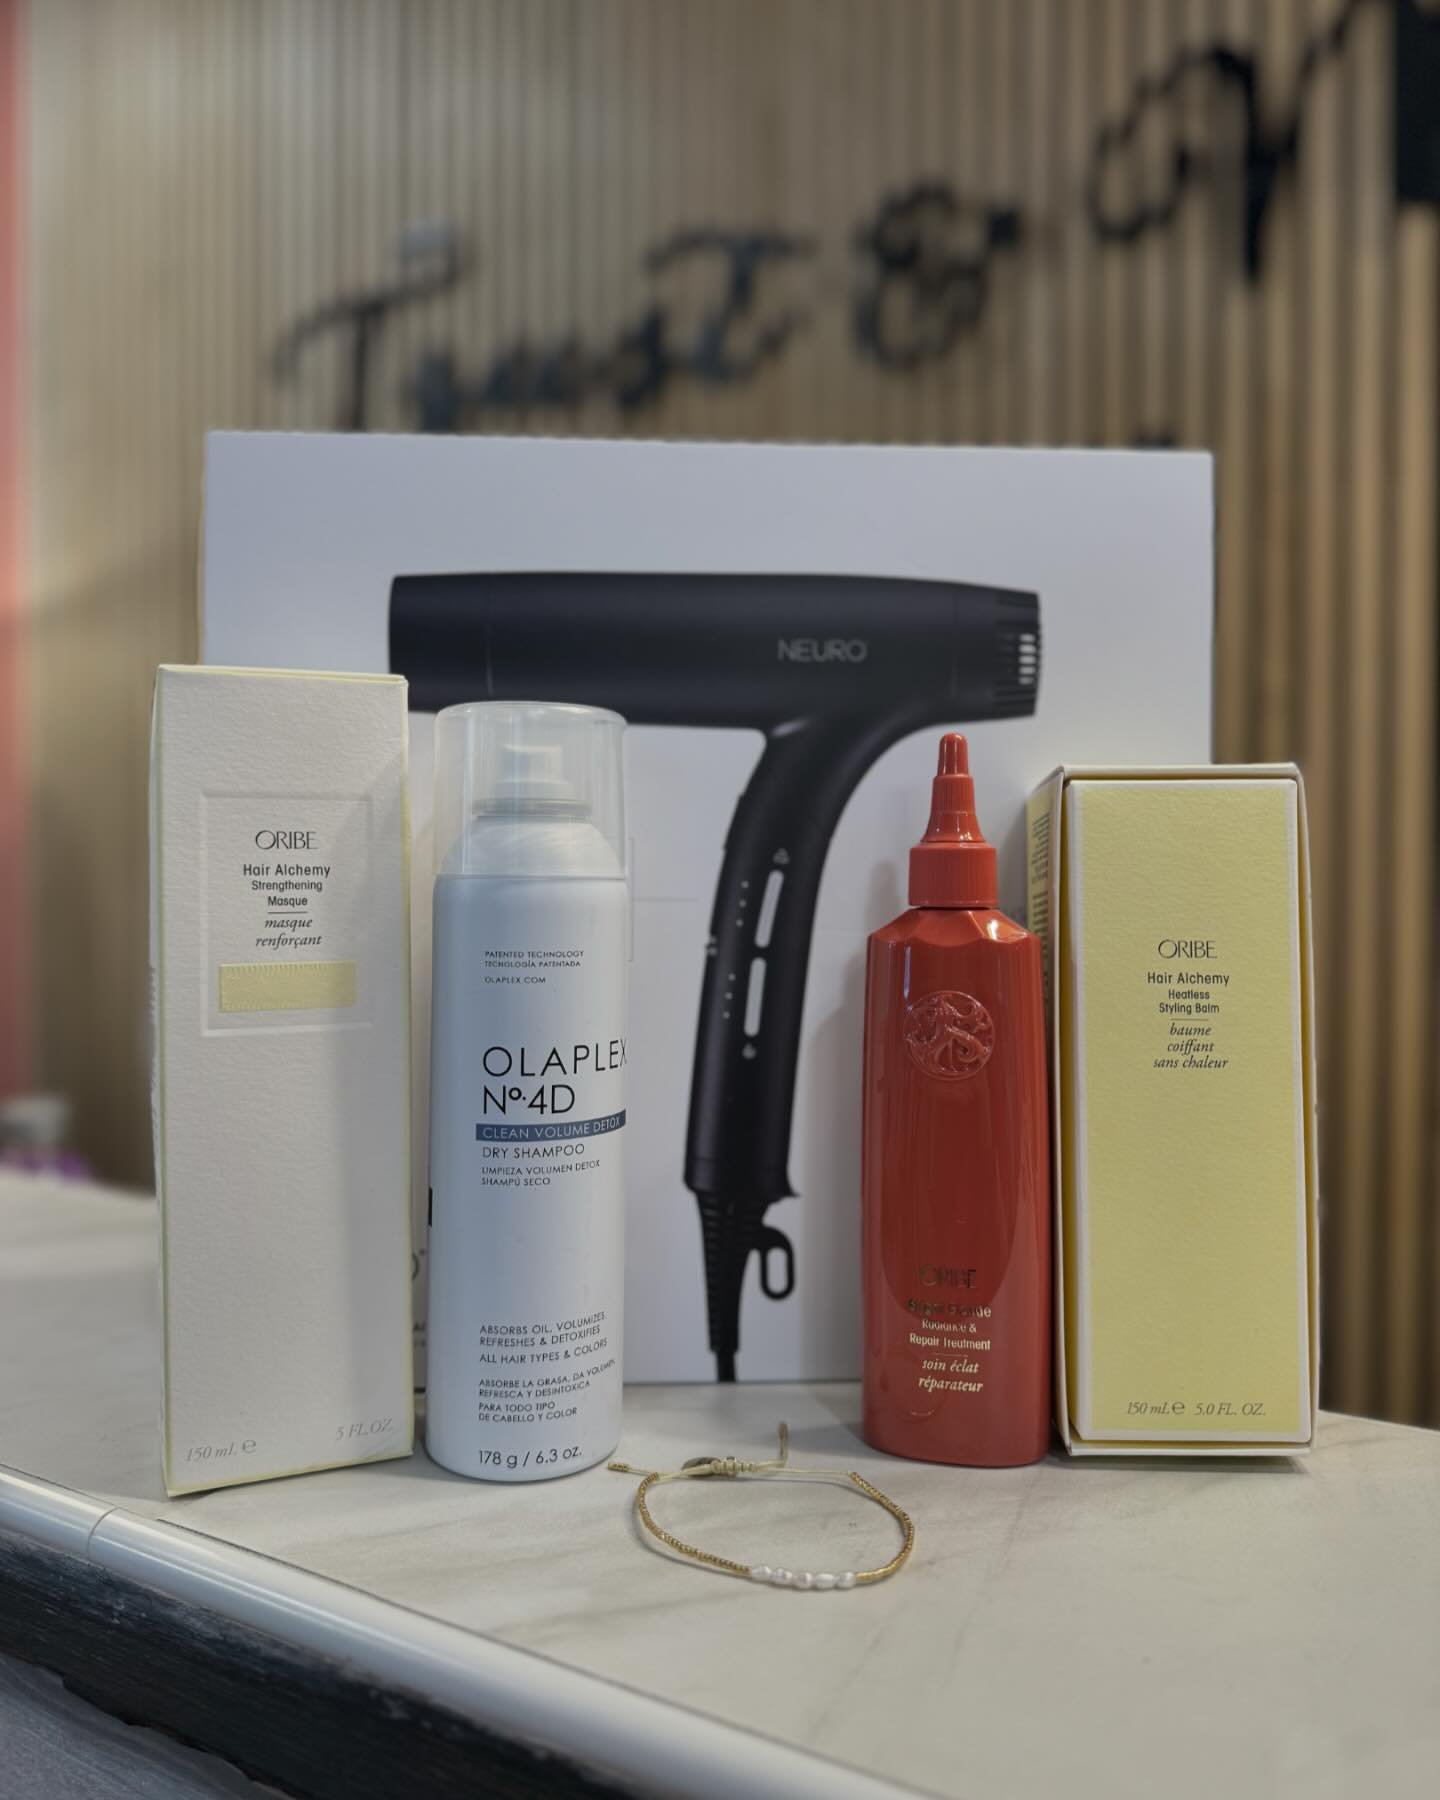 MOTHERS DAY GIVEAWAY🌟🌟
HOW TO ENTER⭐️
&bull; Tag a mother figure near and dear
&bull; follow @trustandmanesalon 
&bull; like this post and share to your story
INCLUDES⭐️
&bull; ORIBE hair alchemy masque
&bull; OLAPLEX dry shampoo 
&bull; NEURO blow